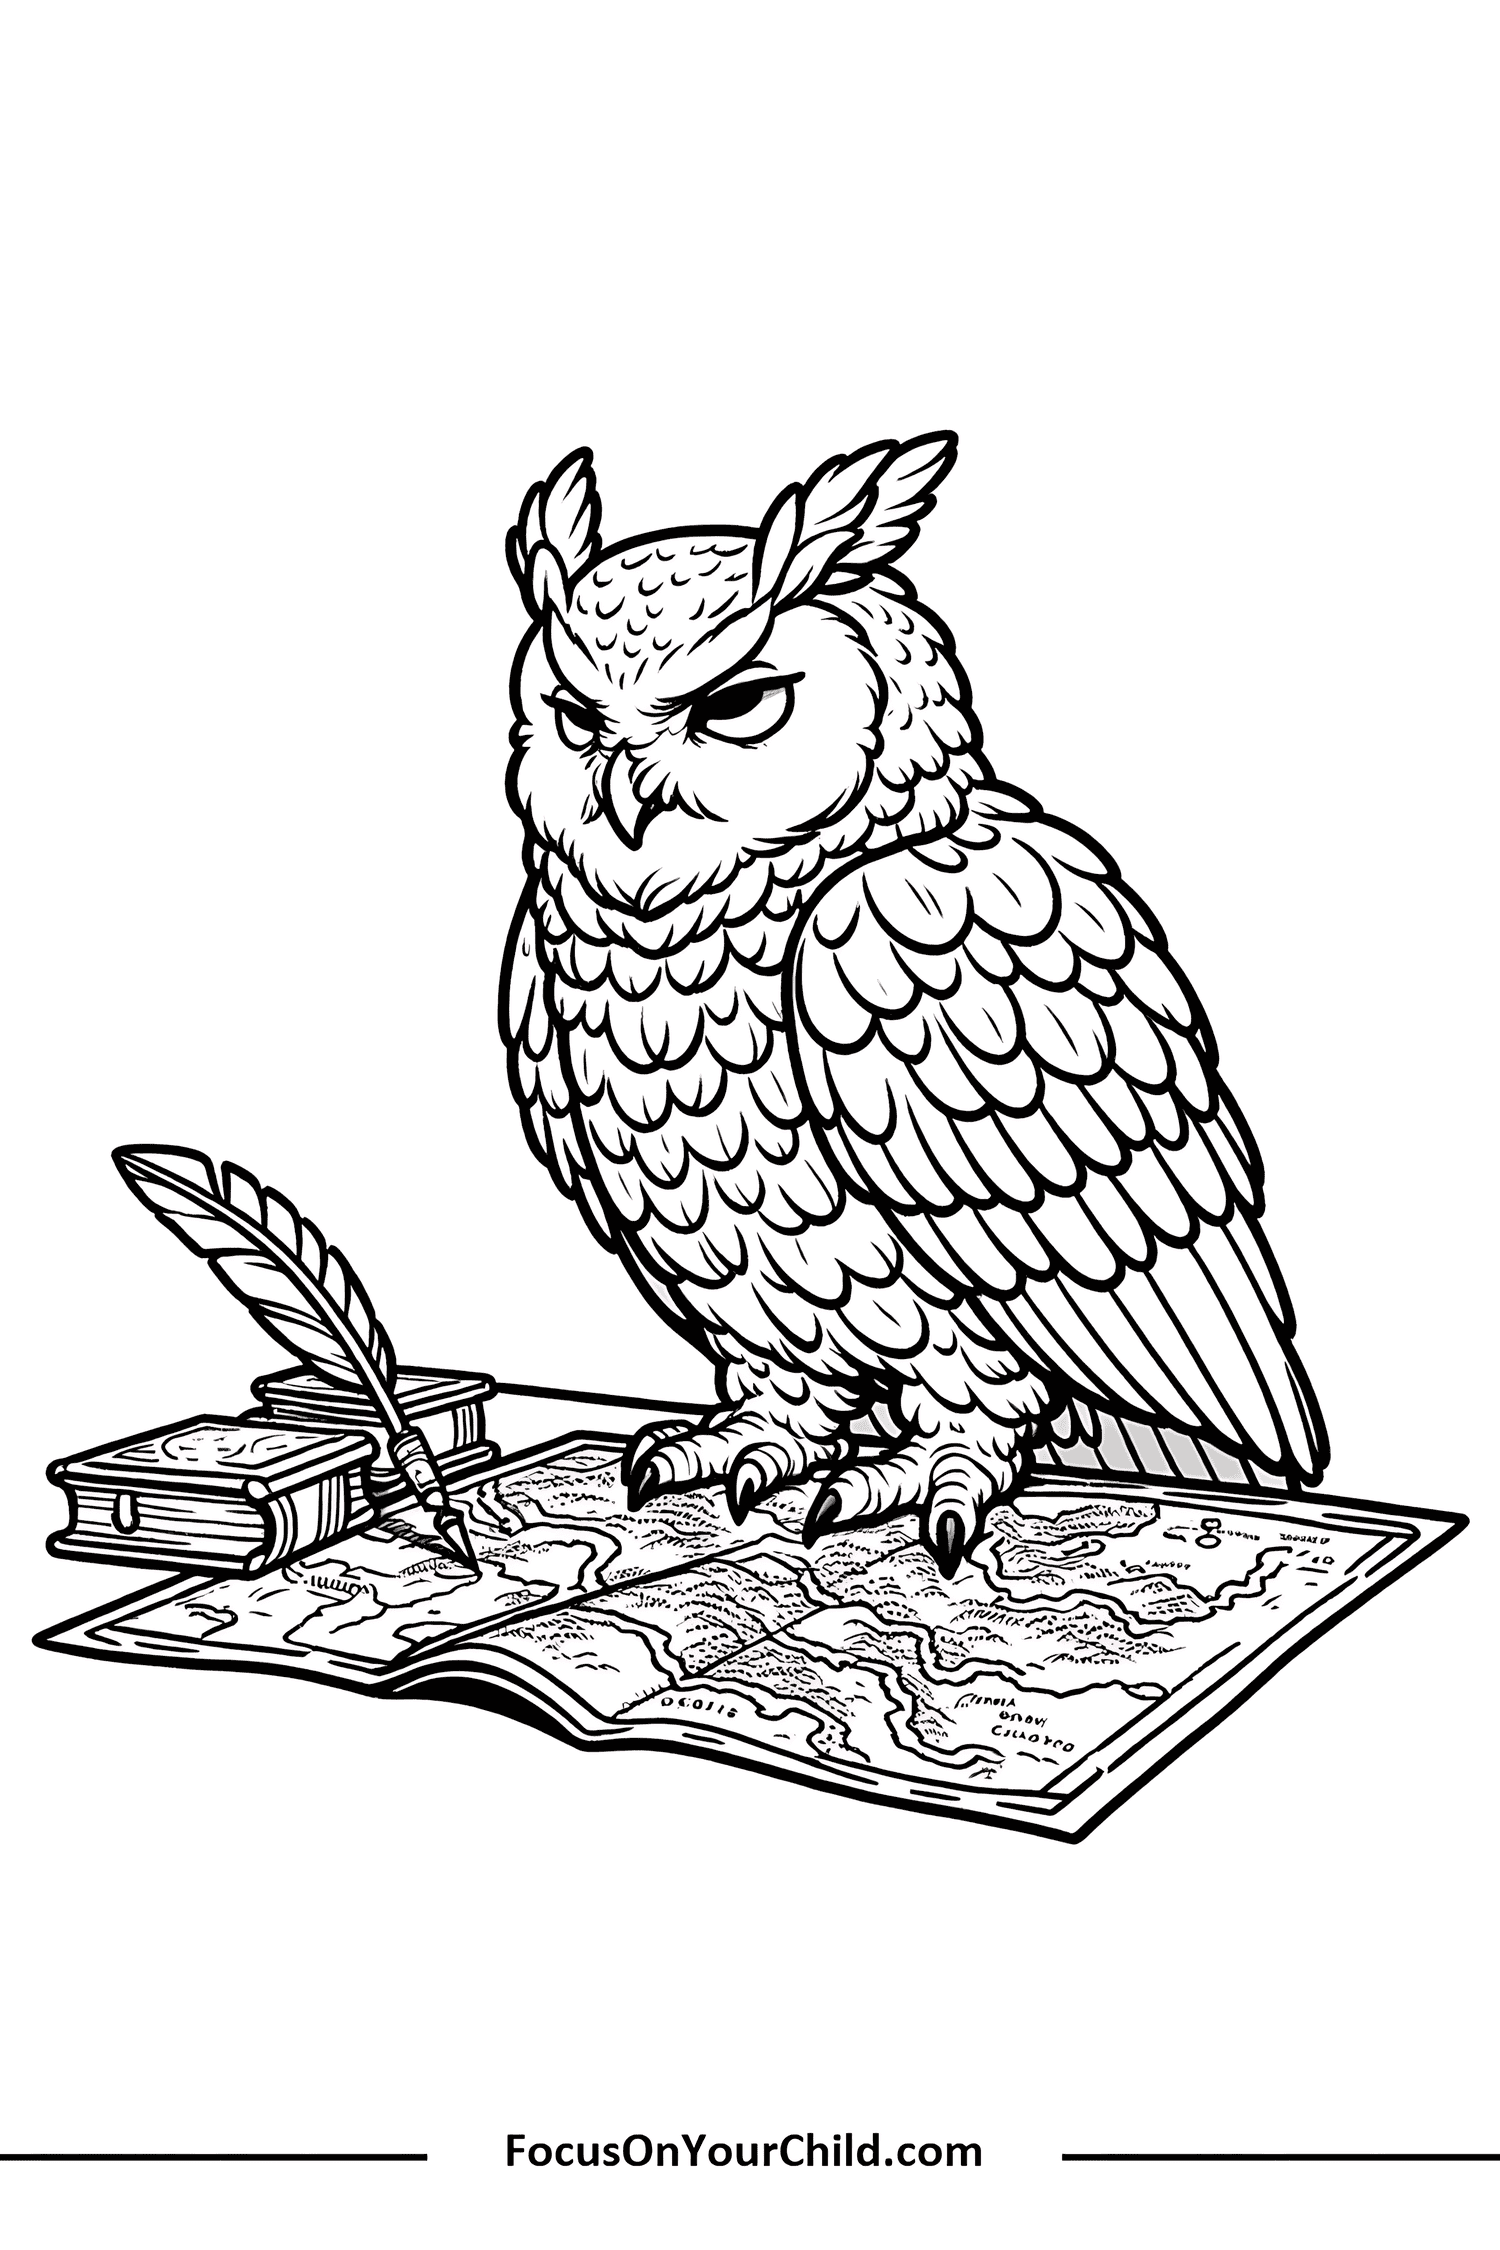 Wise owl on book with maps, quill, and stack of books.